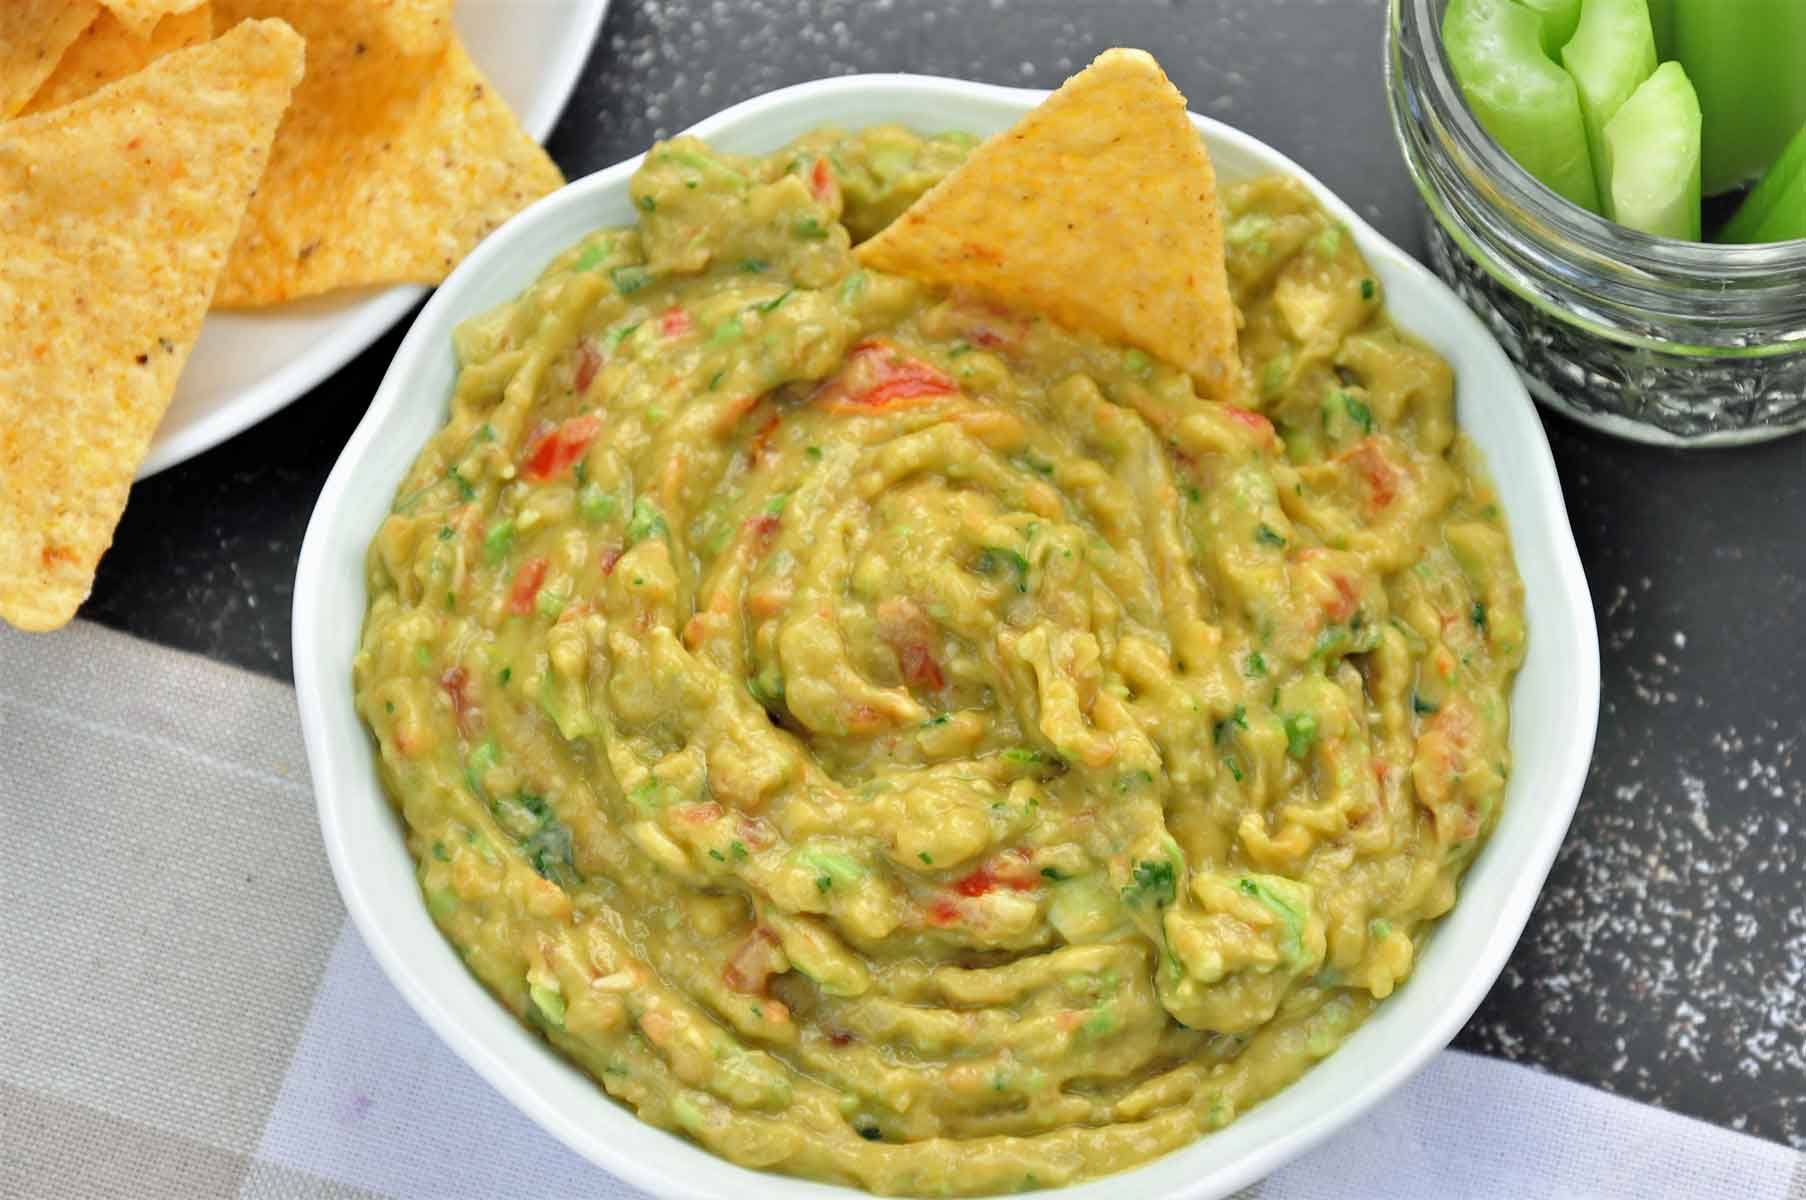 Guacamole served in a bowl with tortilla chips.